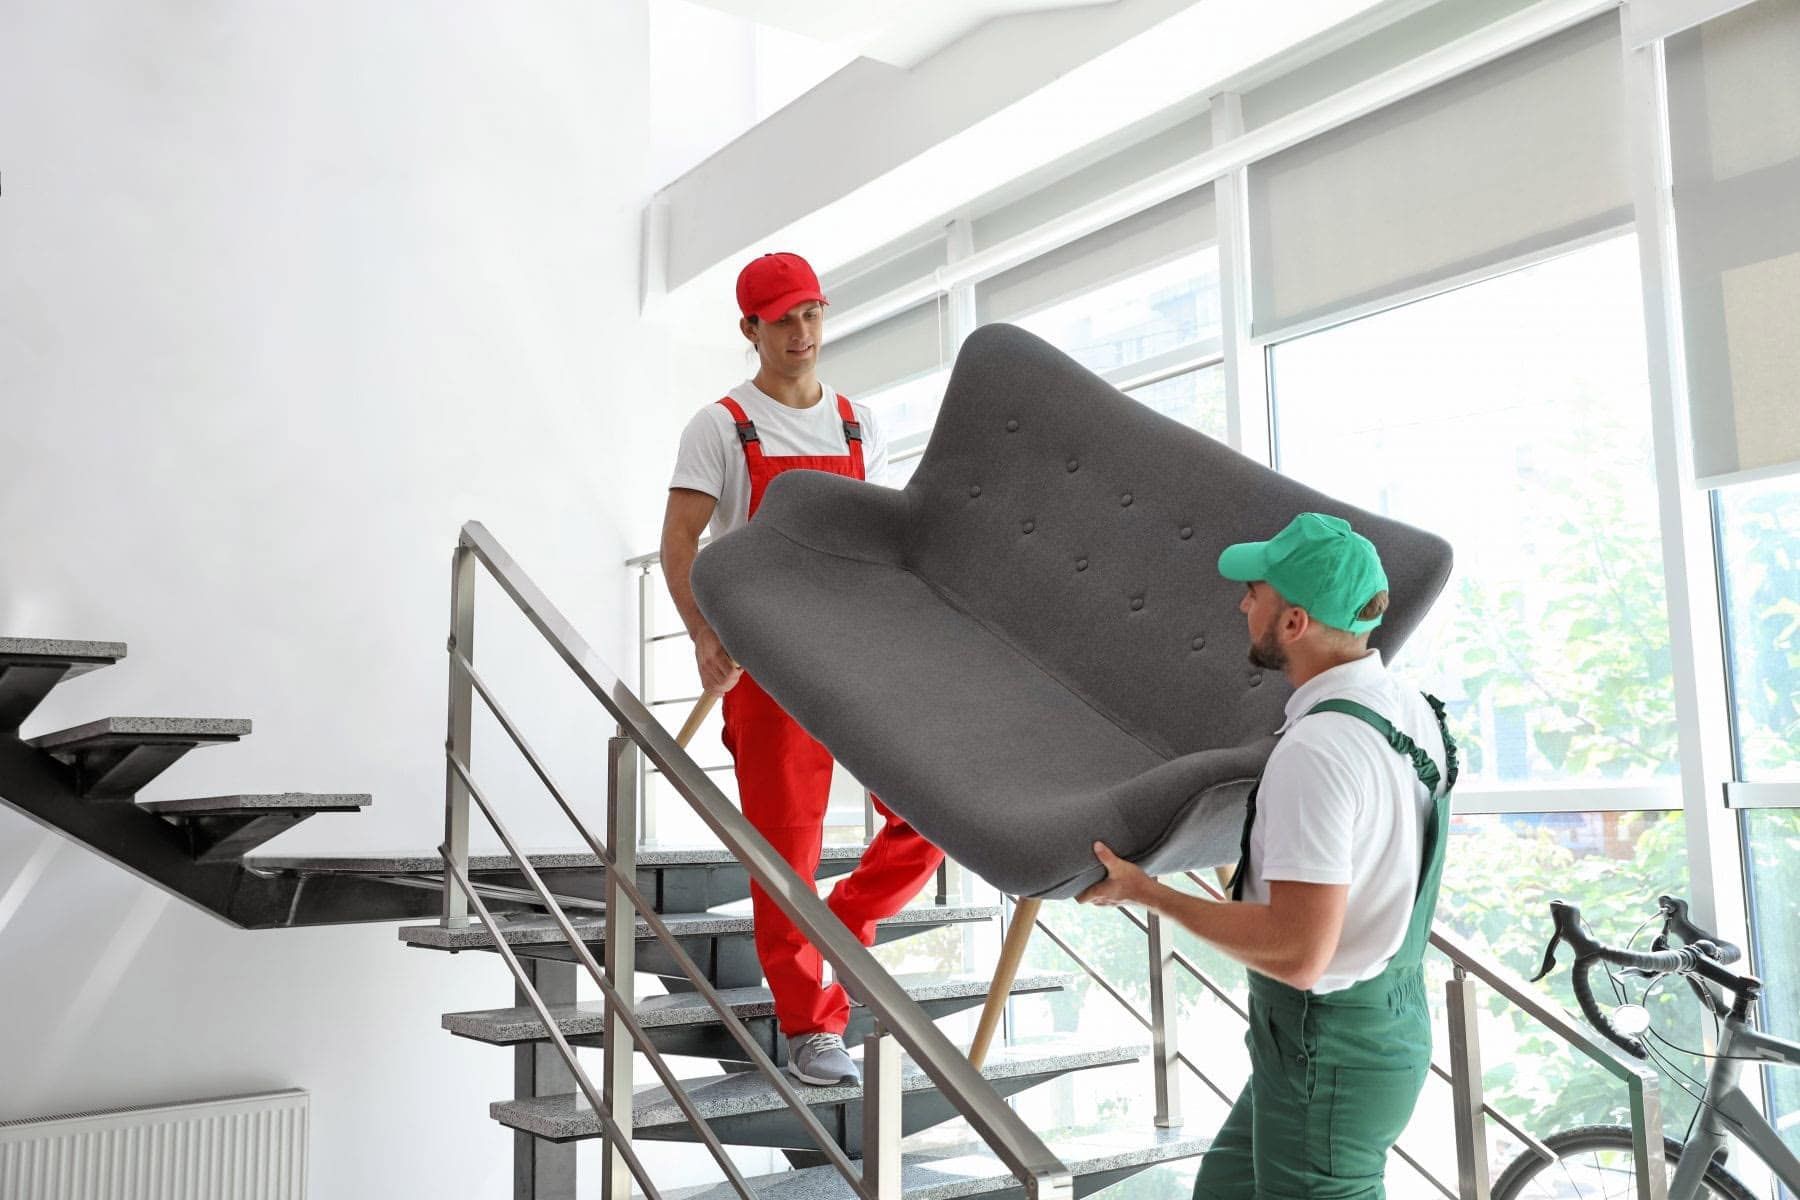 Packers and Movers Carrying Sofa down staircase